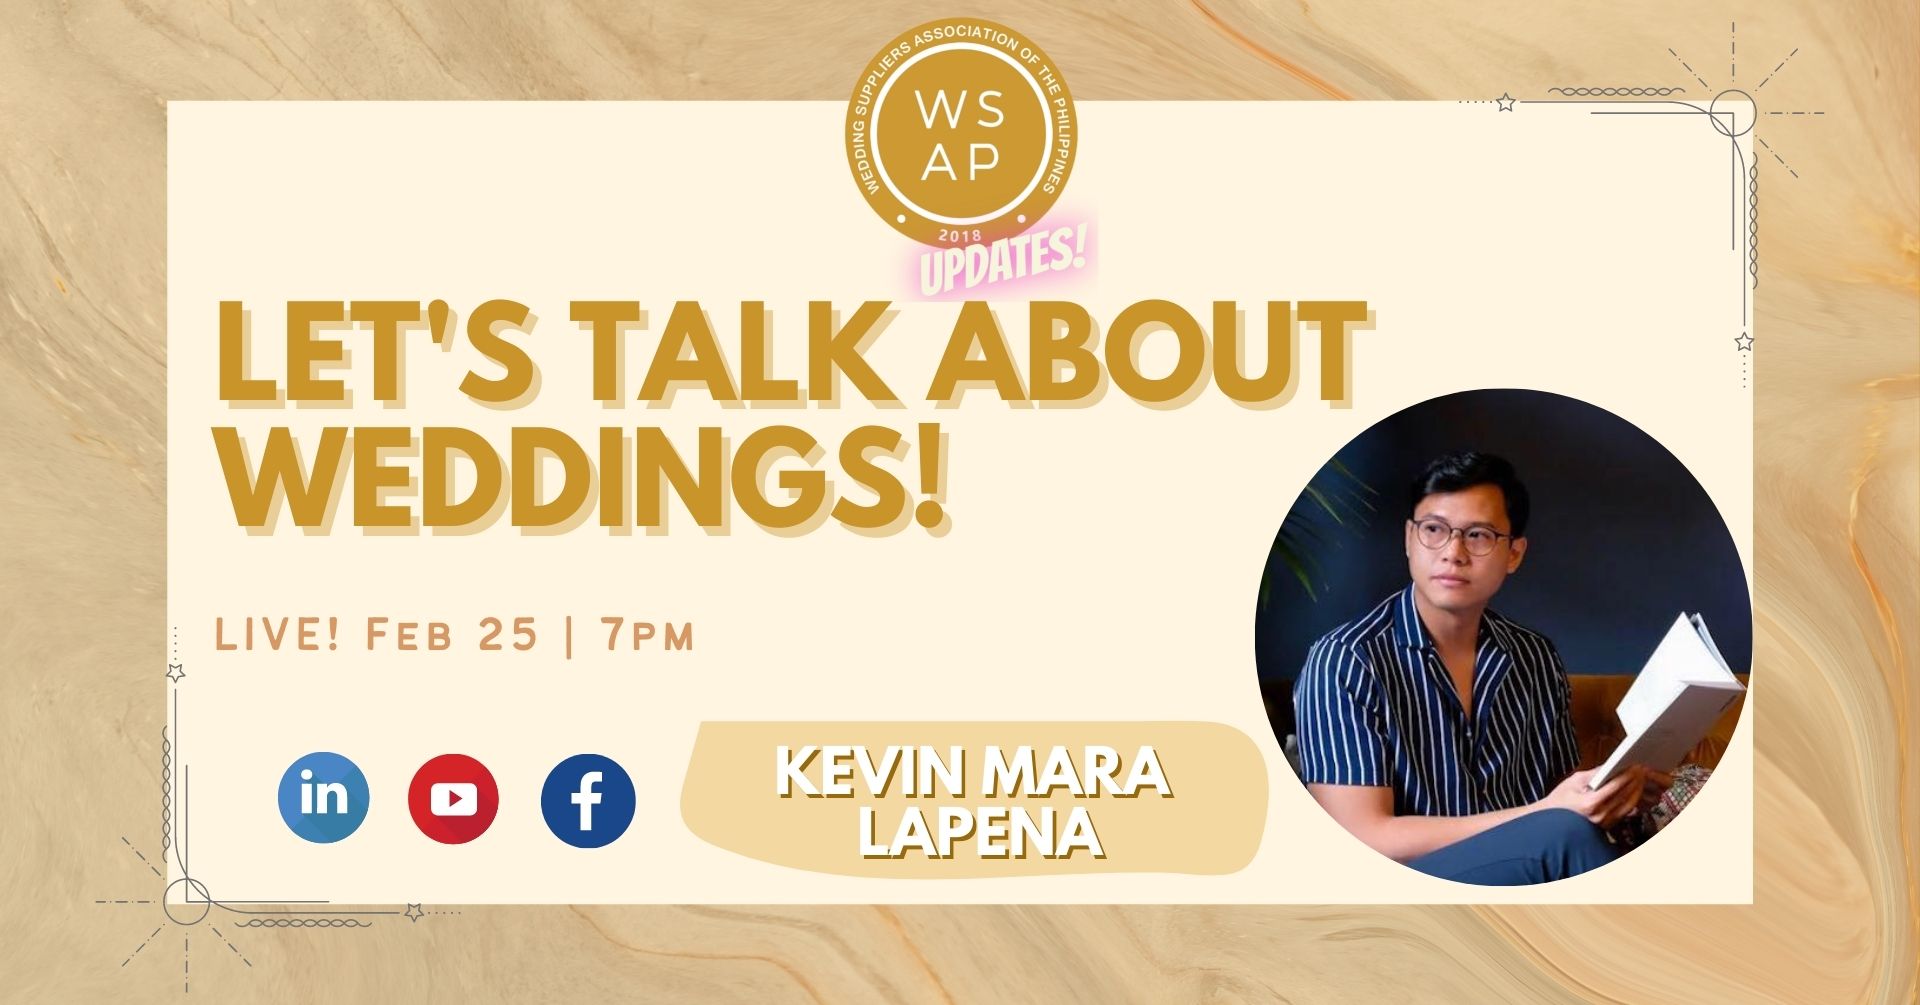 Let's Talk About Wedding with Kevin Mara Lapena